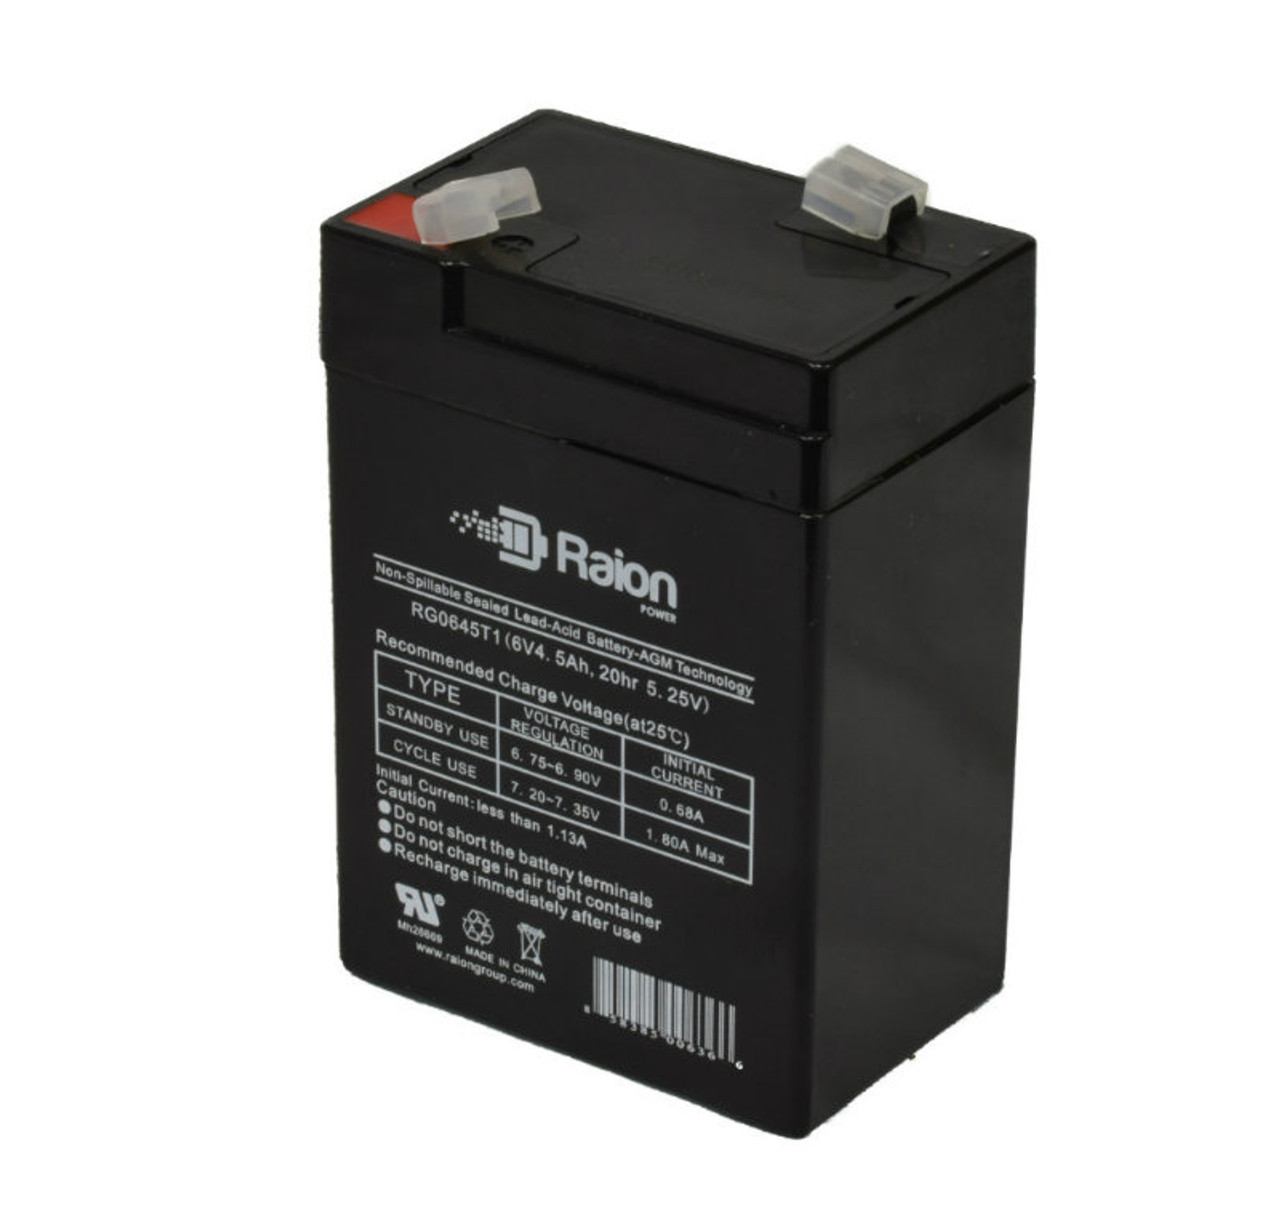 Raion Power RG0645T1 6V 4.5Ah Replacement Battery Cartridge for Motoma MS6V4S